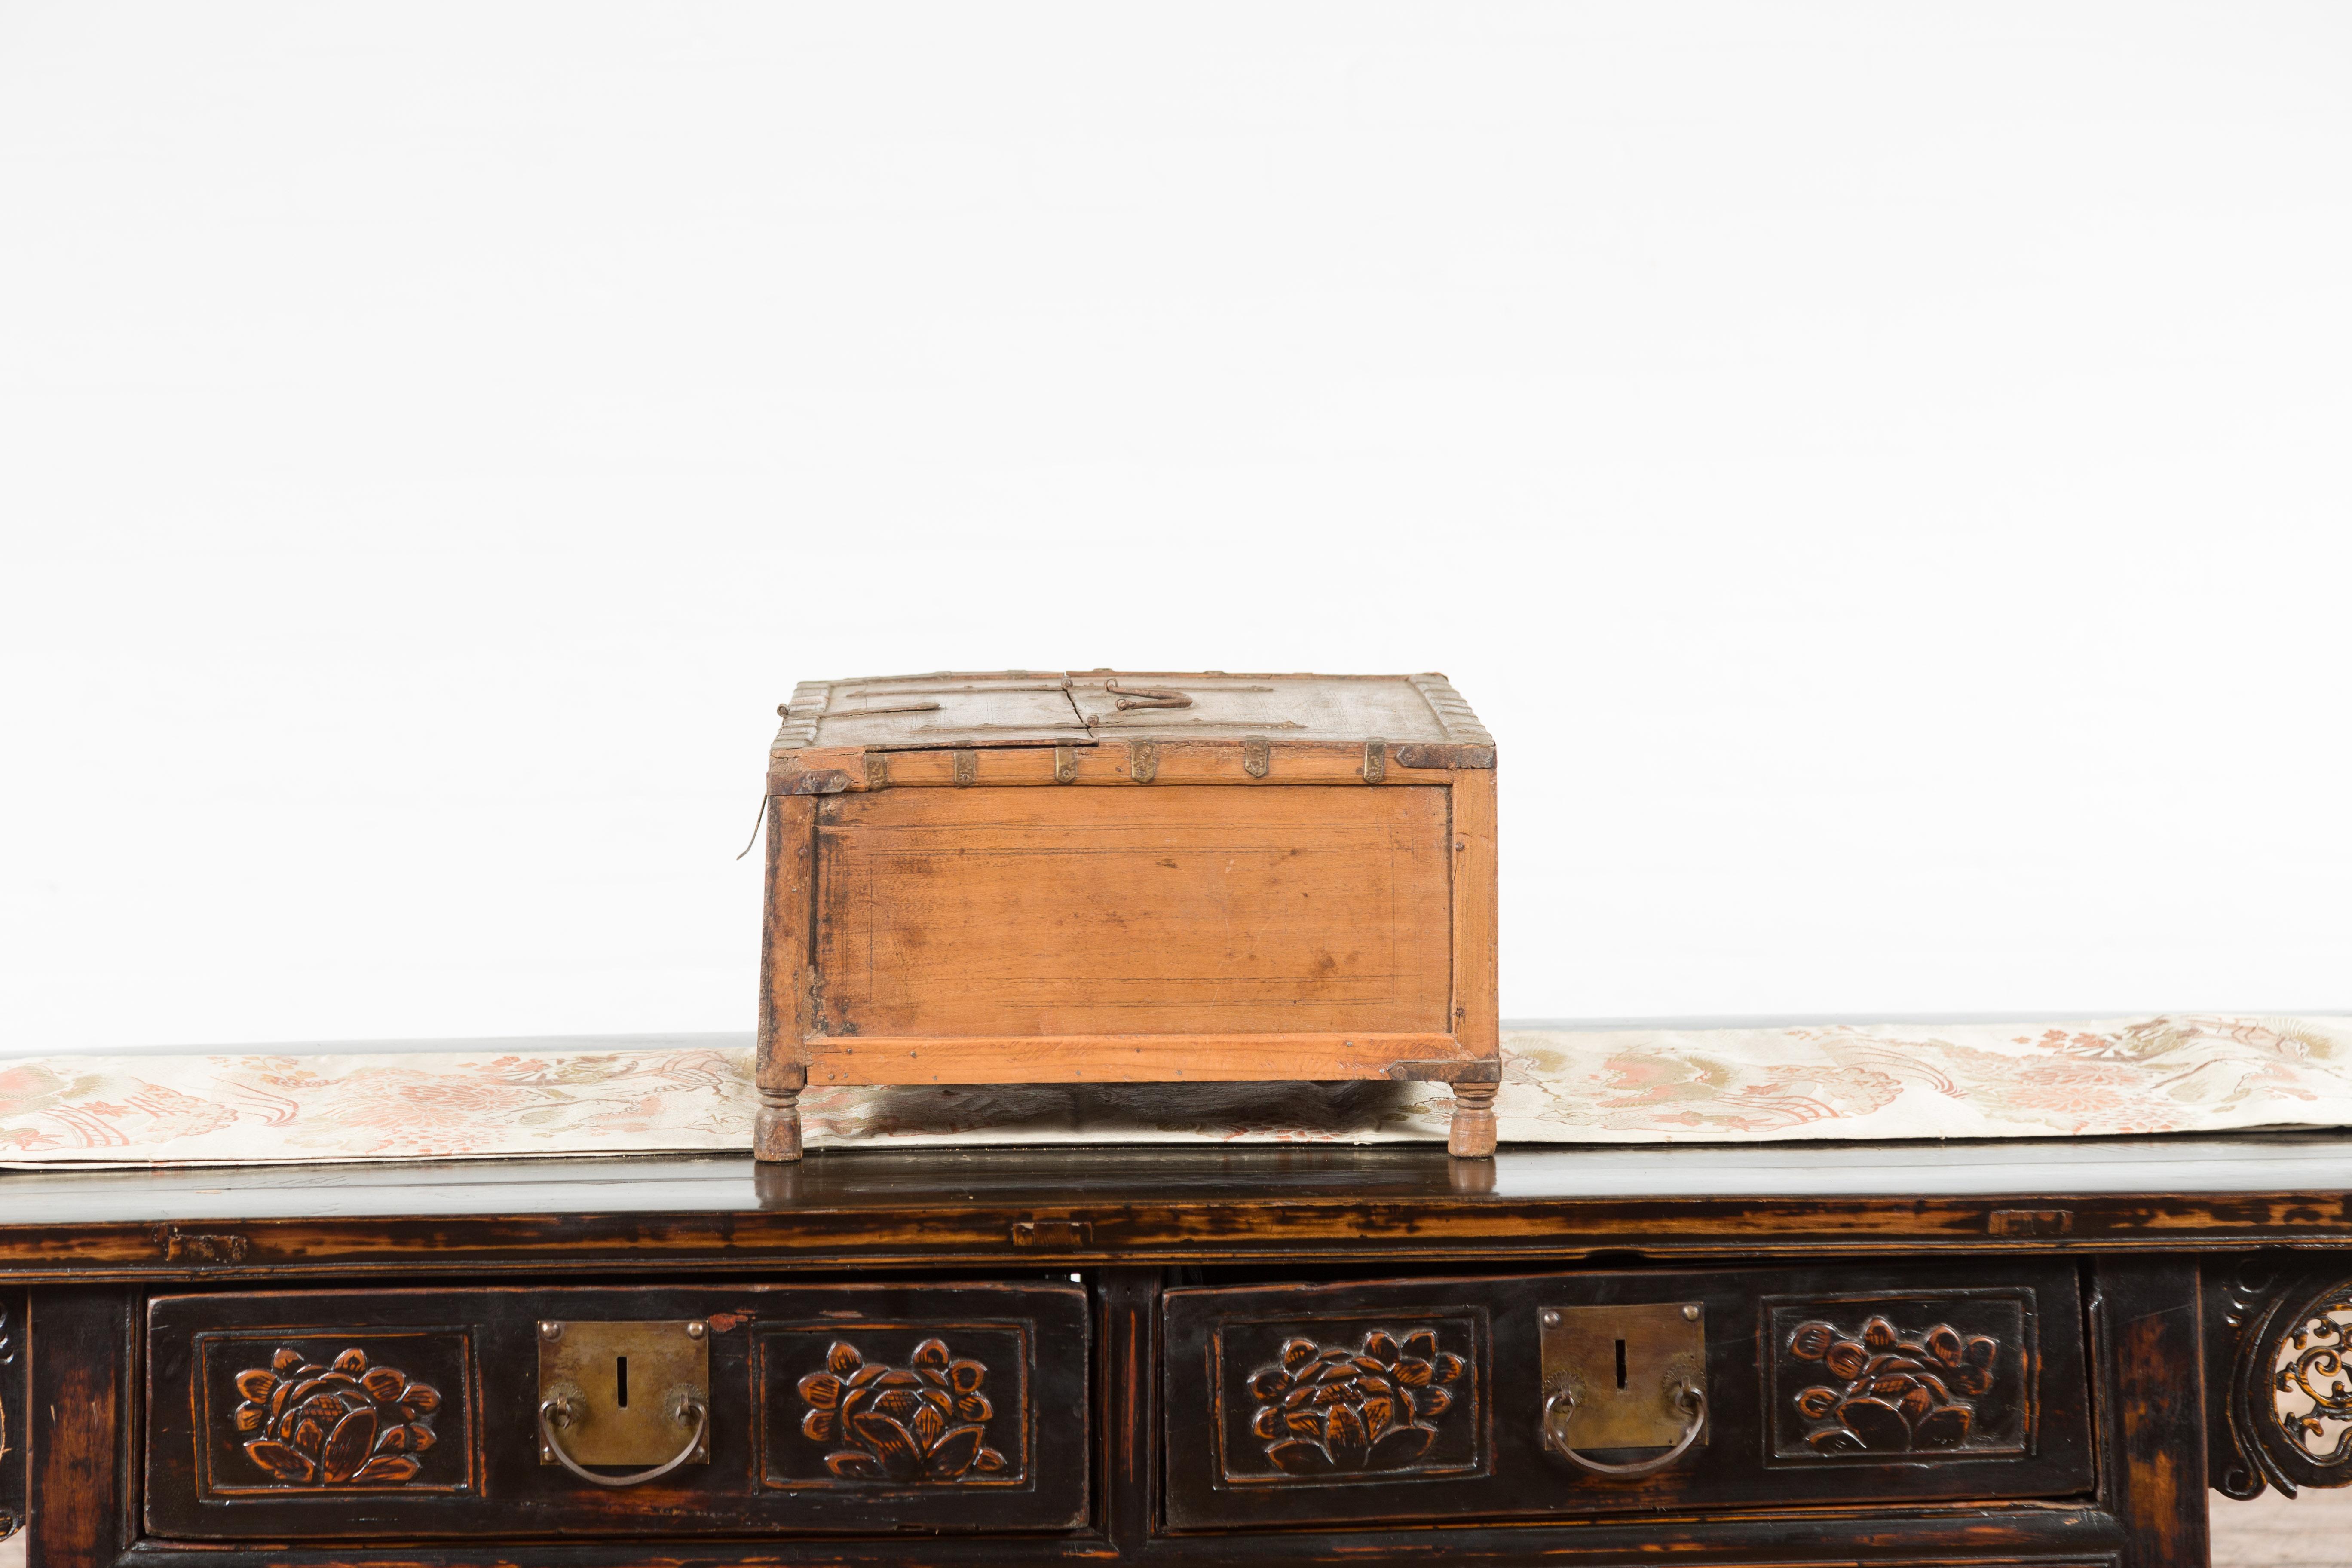 Rustic Indian 19th Century Wooden Box with Iron Details and Concentric Circles For Sale 5